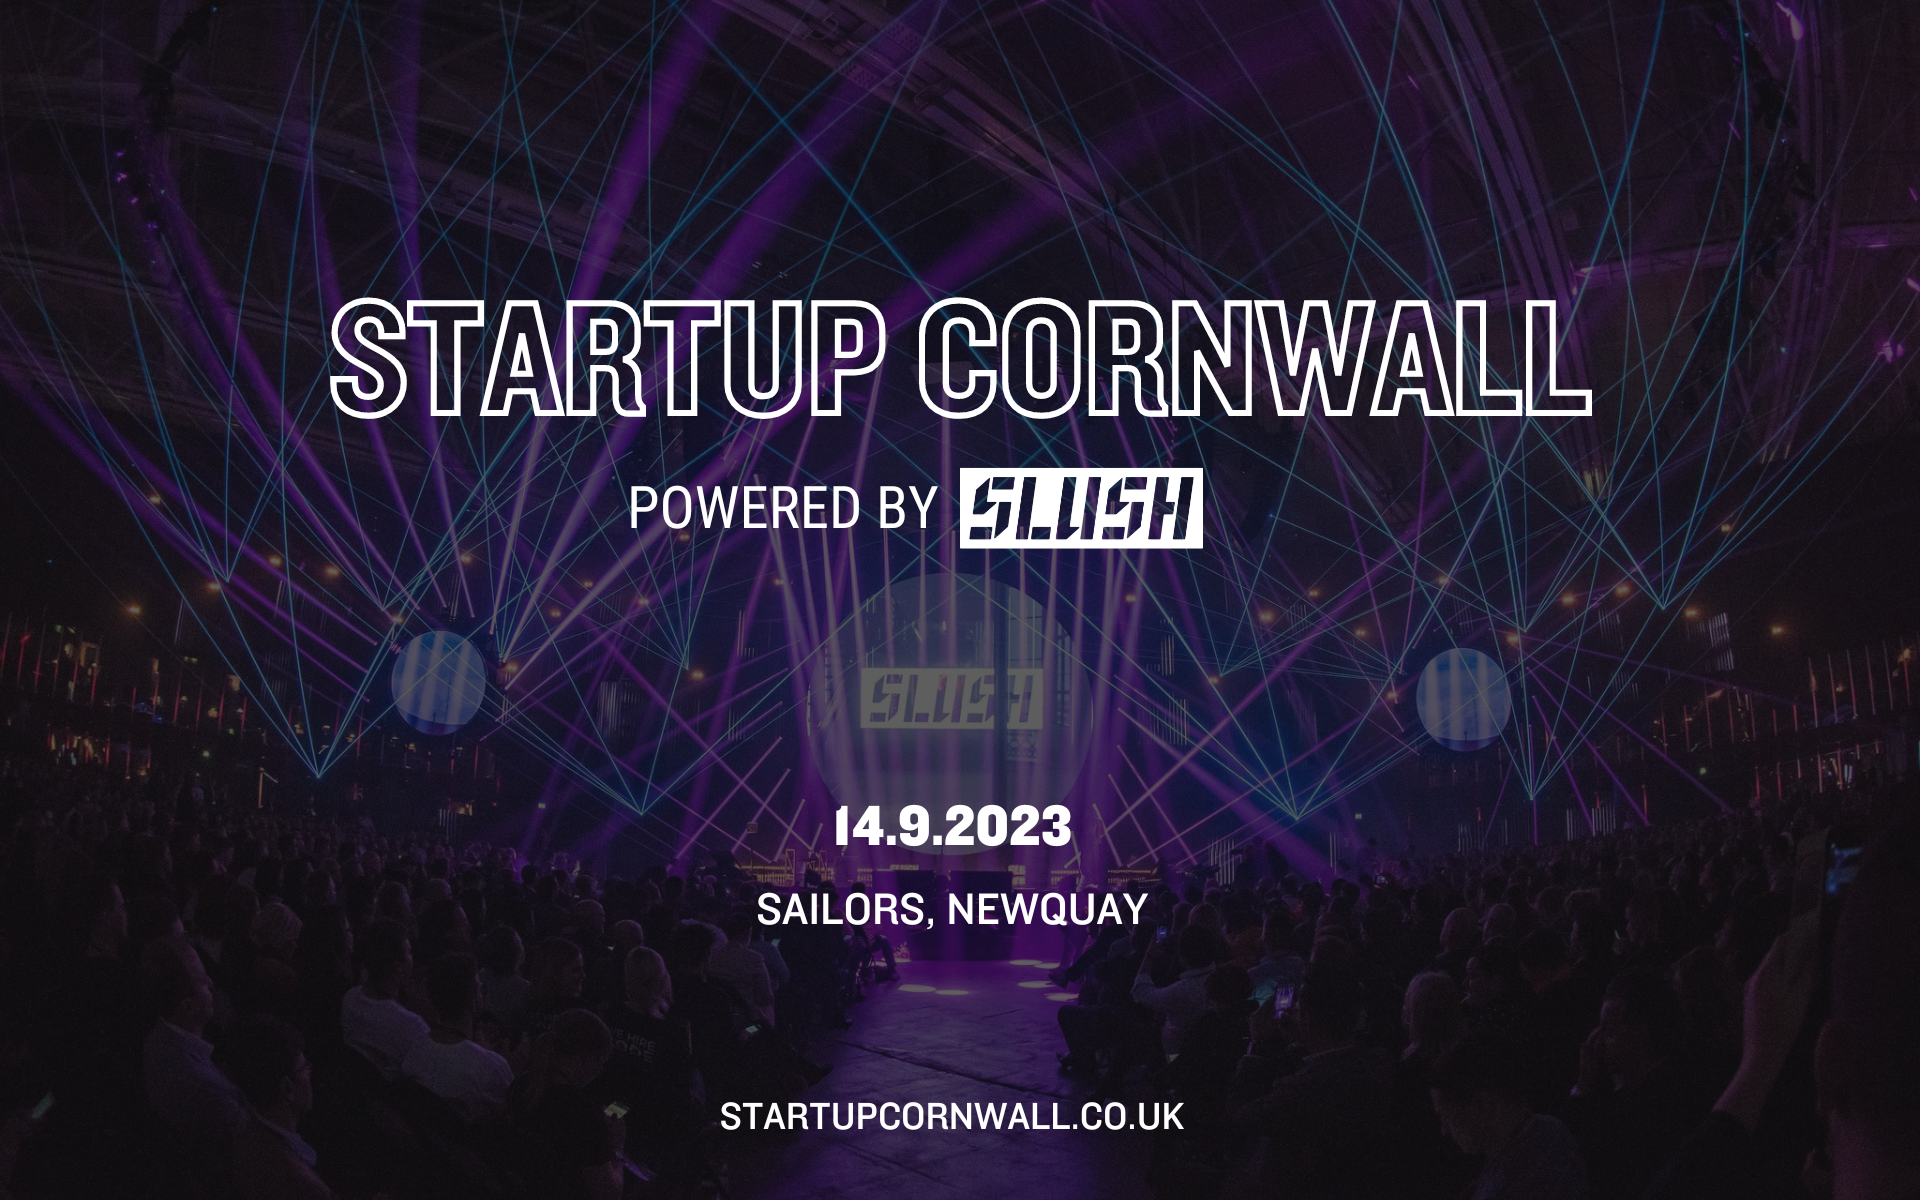 Start up Cornwall, powered by Slush'd, hosted by Software Cornwall